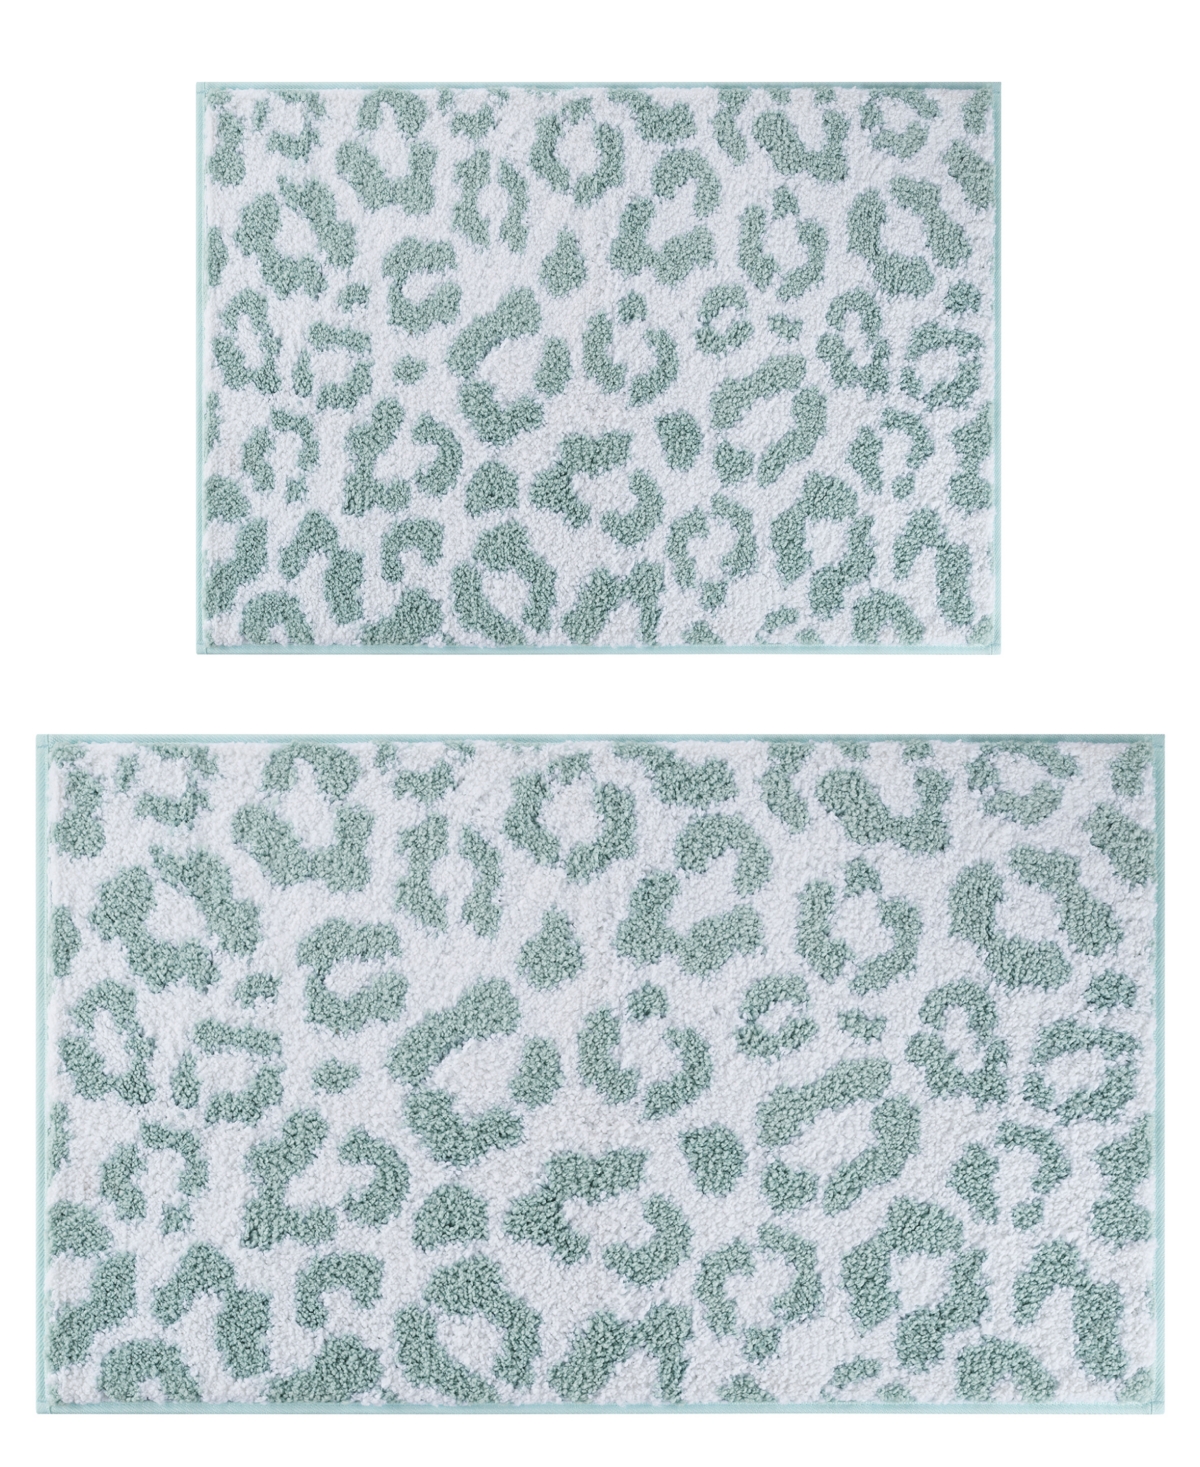 Juicy Couture Ombre Leopard 2-piece Bath Rug Set Bedding In Teal